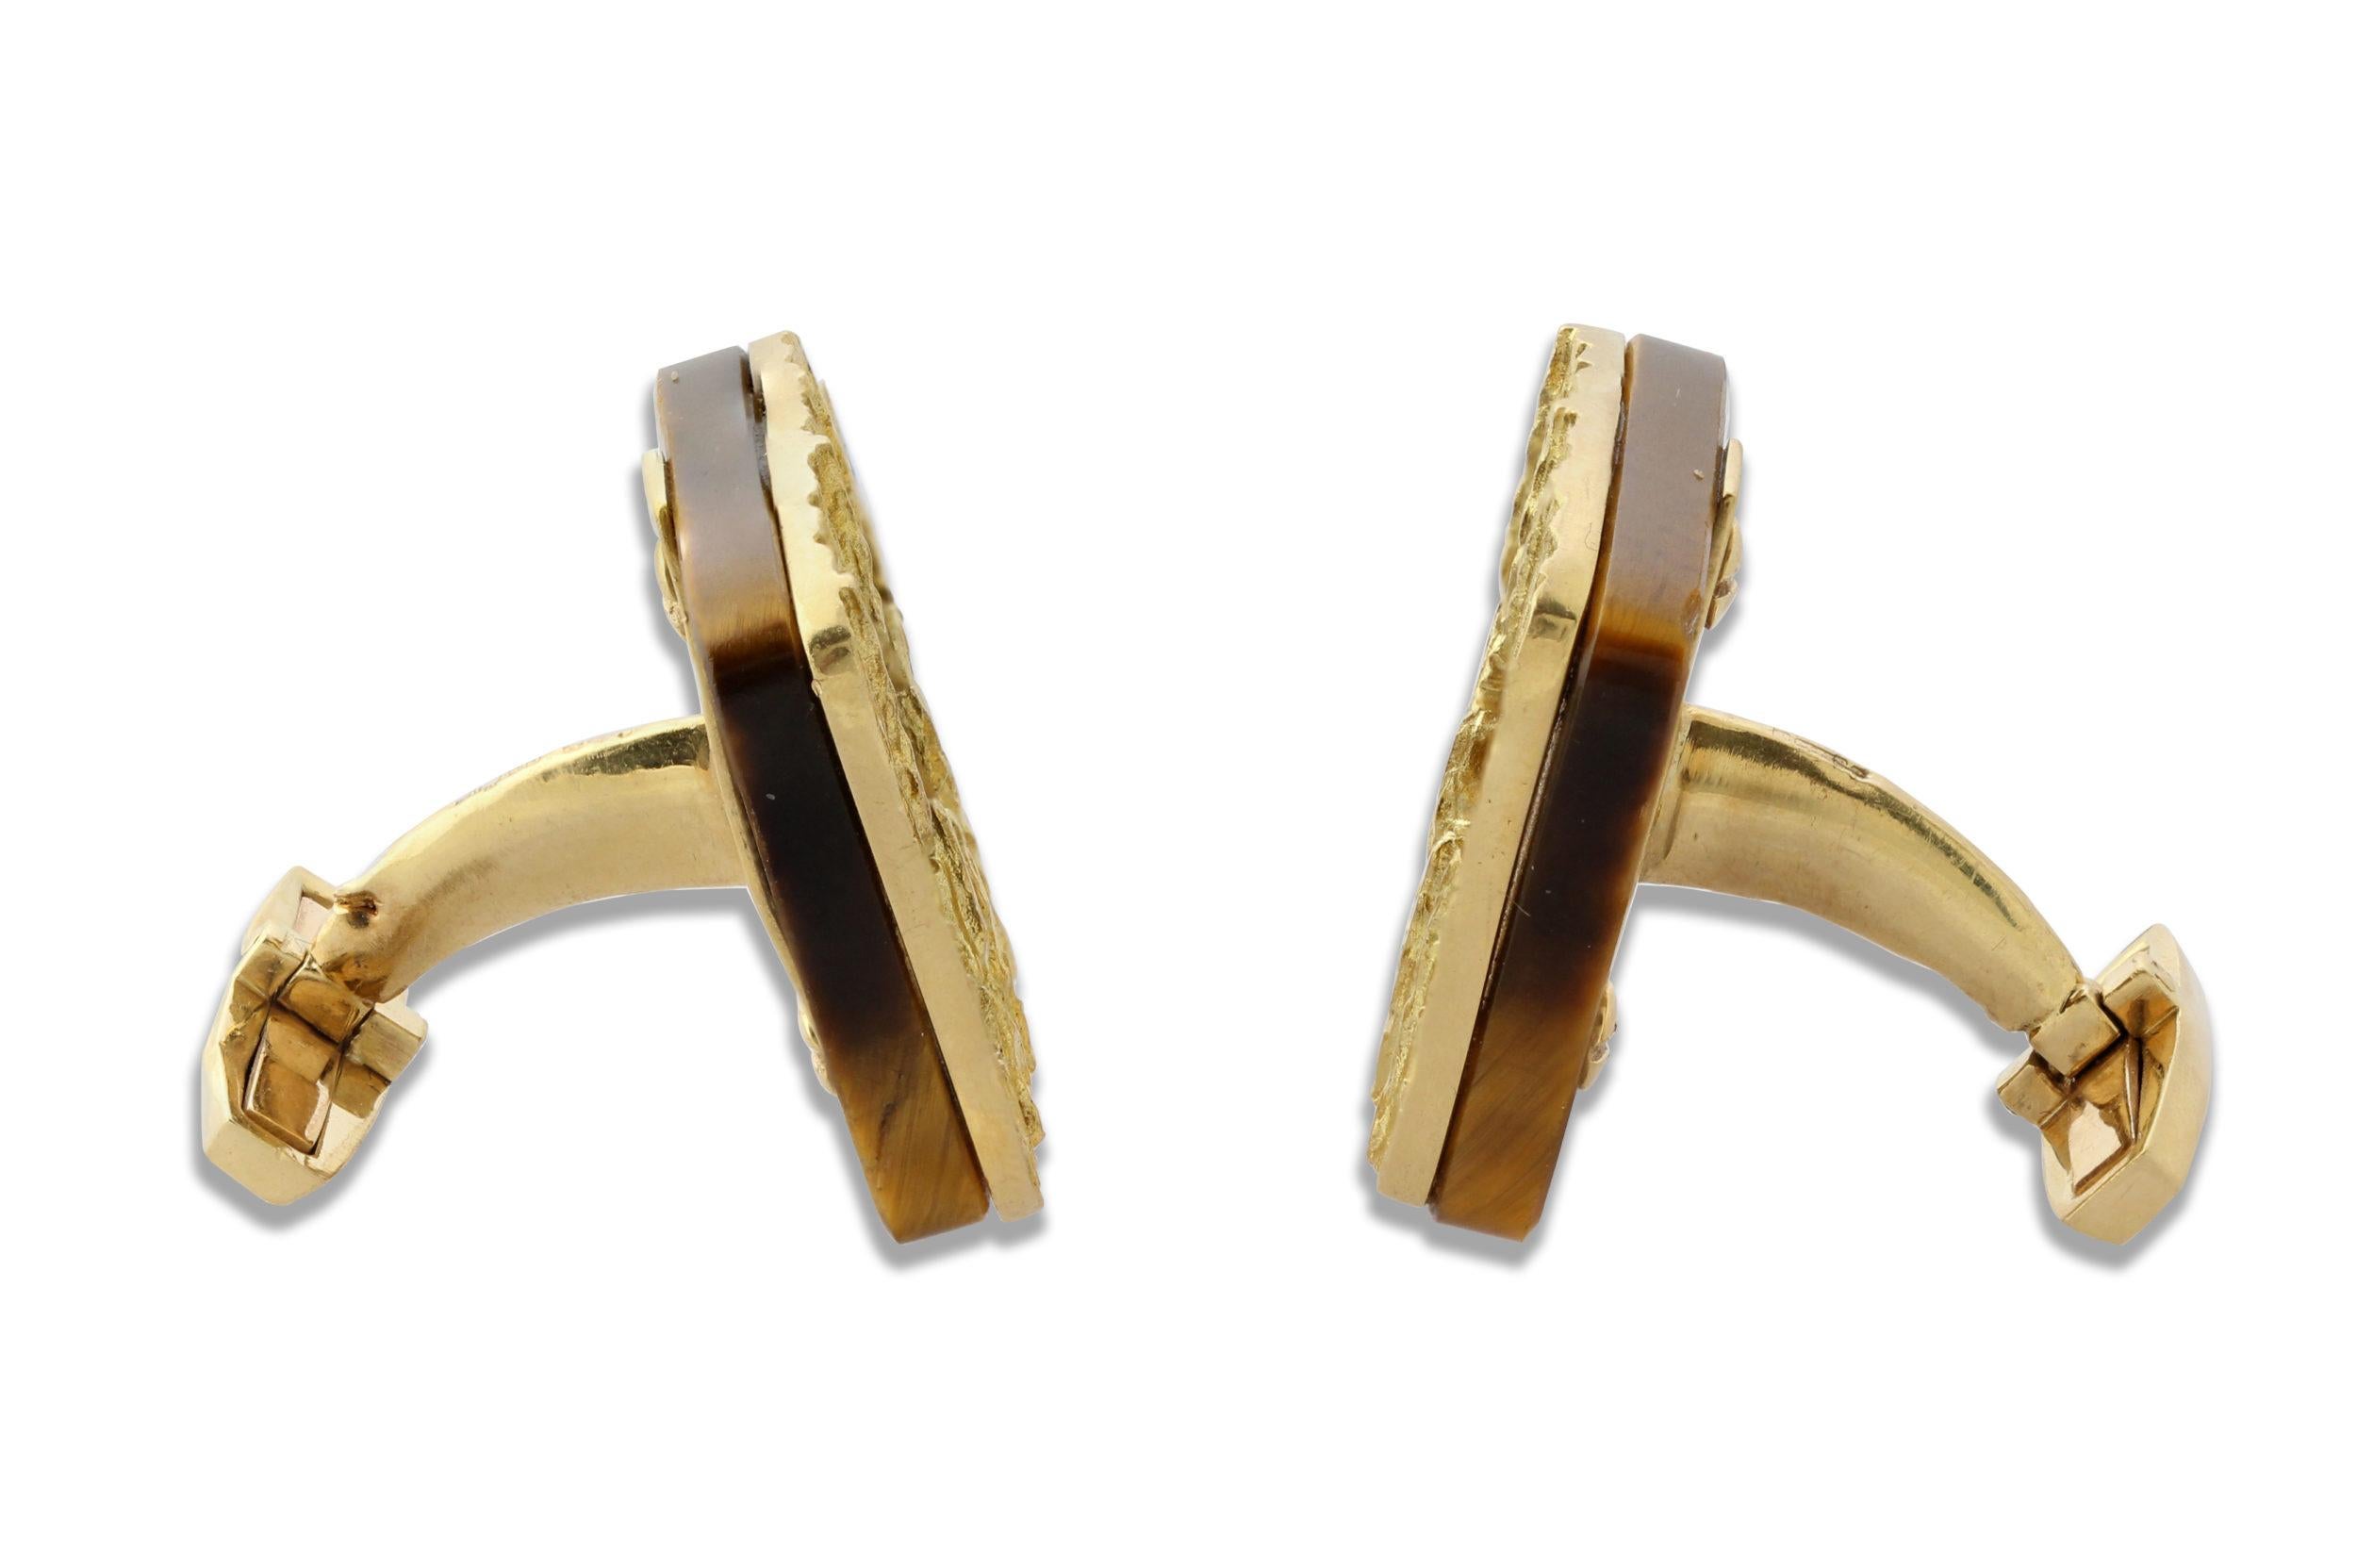 Square Cut Pair of Gold & Tiger’s Eye Cufflinks by Grima